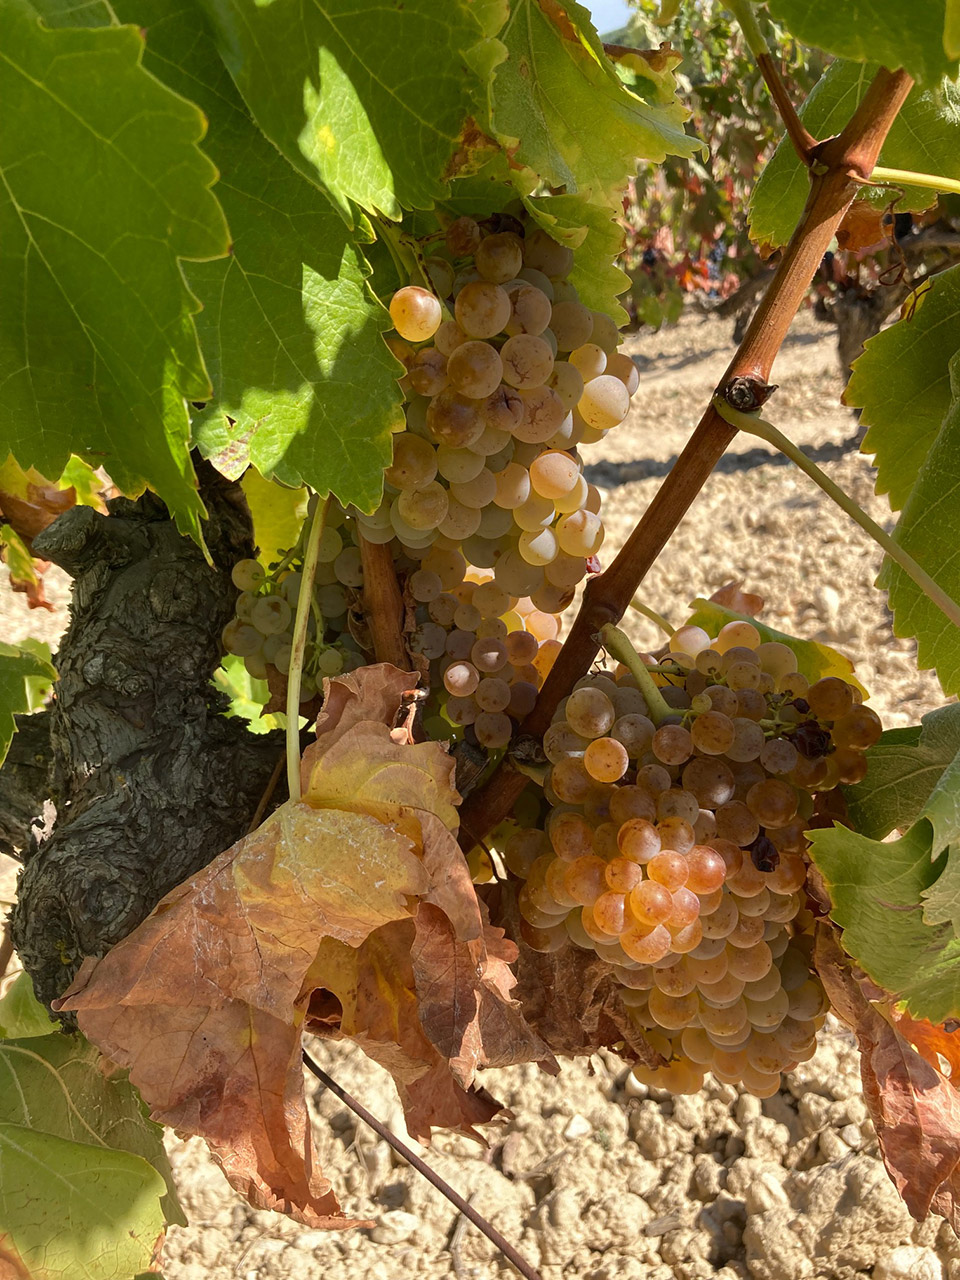 Some Viura grapes from our Manzanera (around our winery) vineyard just before harvest.